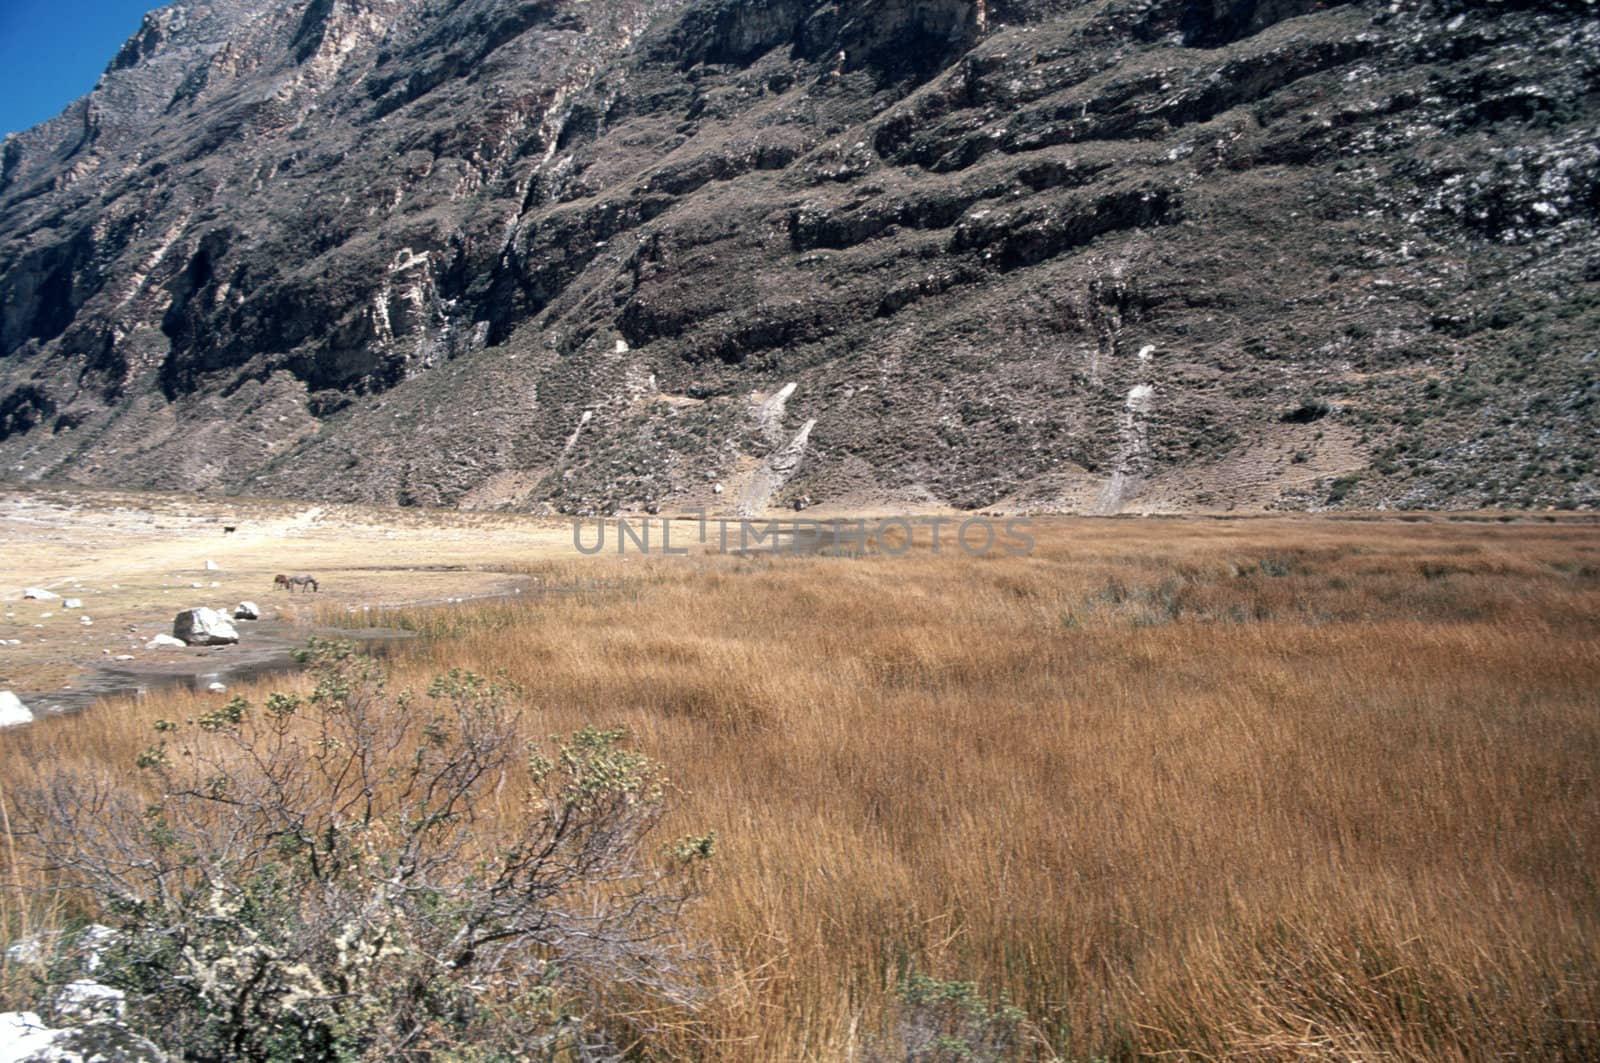 Withered field by a stony abrupt mountain, in Peru, South America